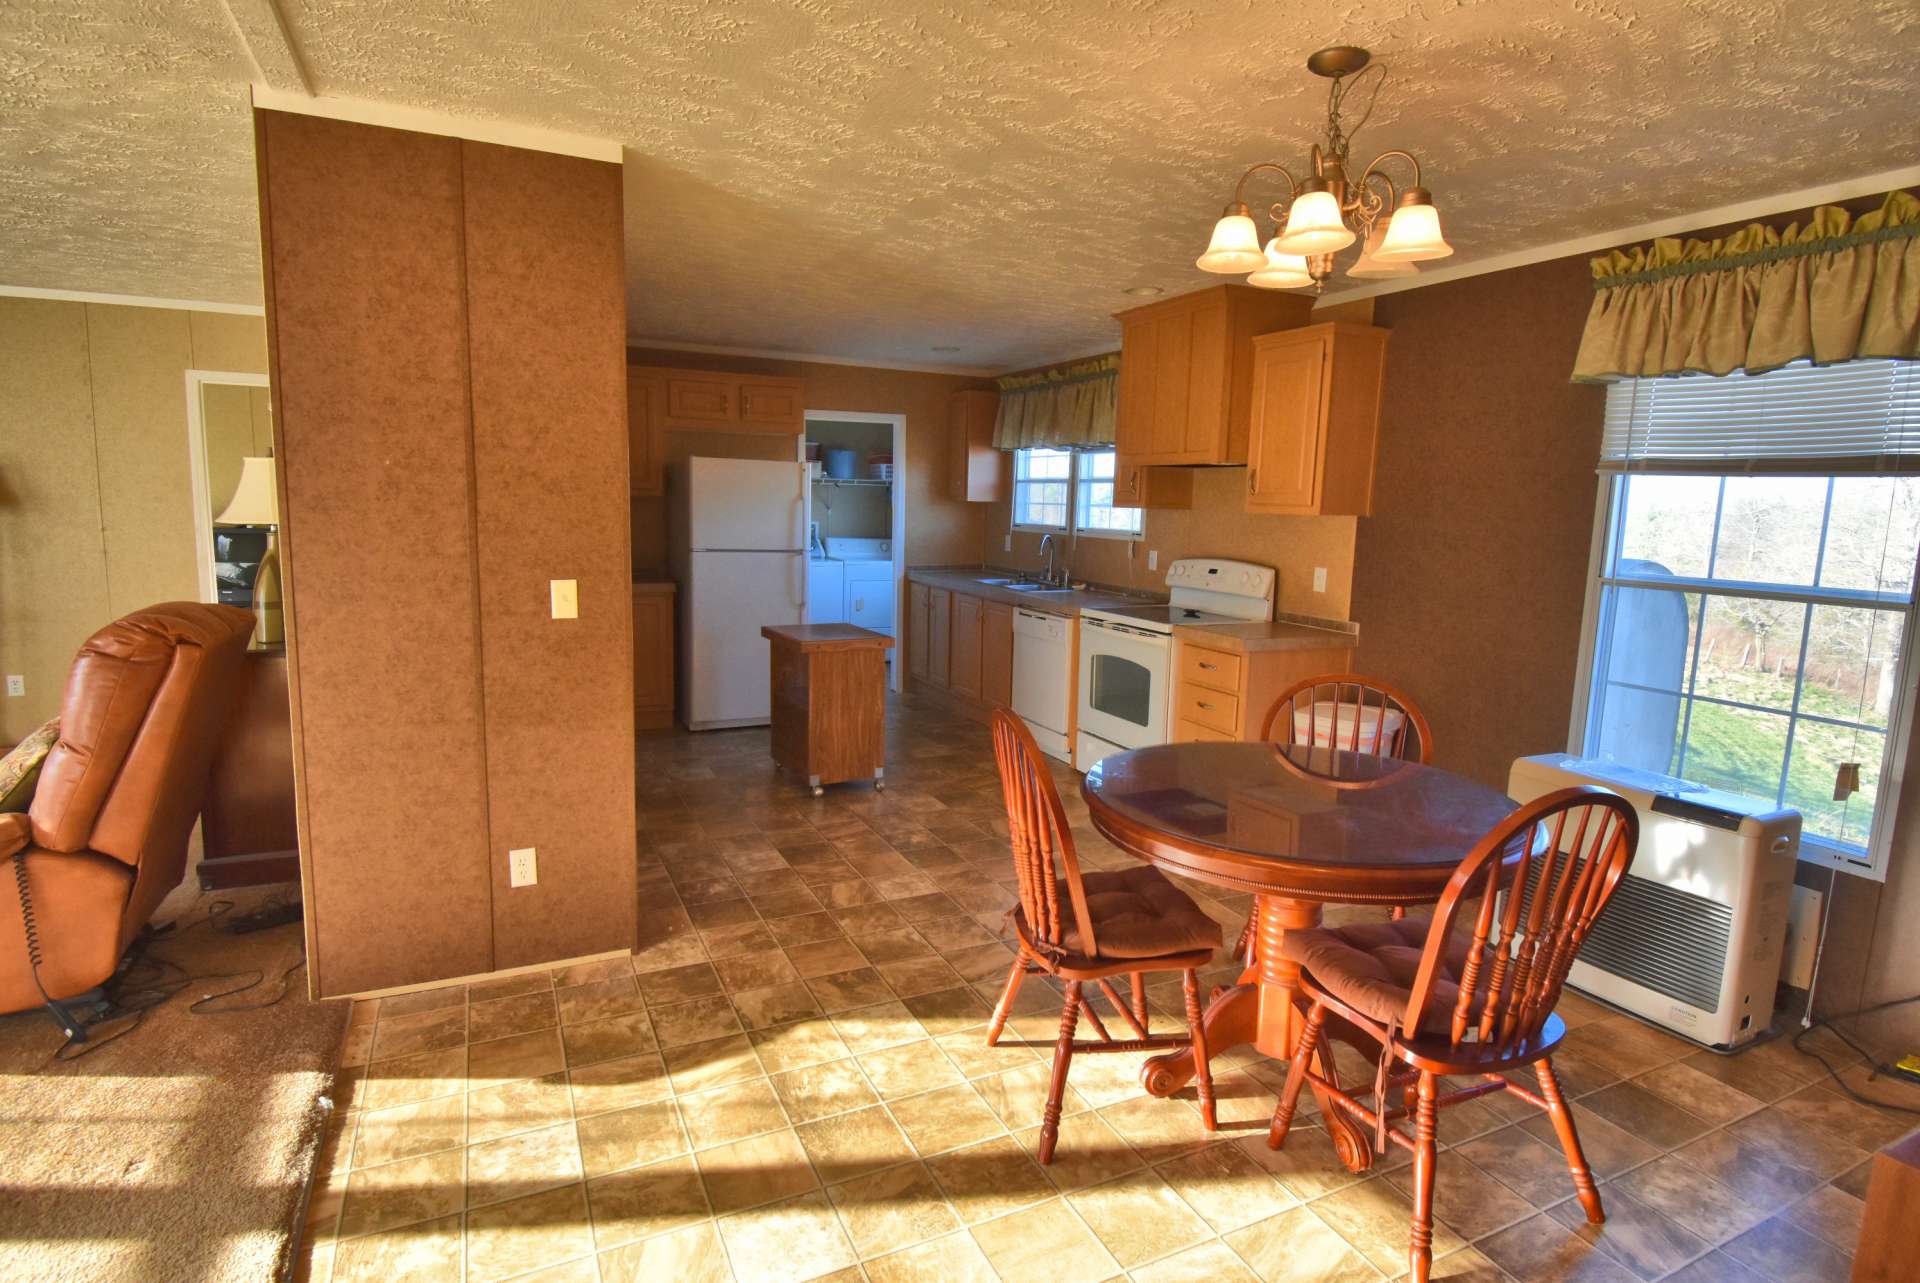 The open floor plan is convenient when entertaining or simply spending time with family.